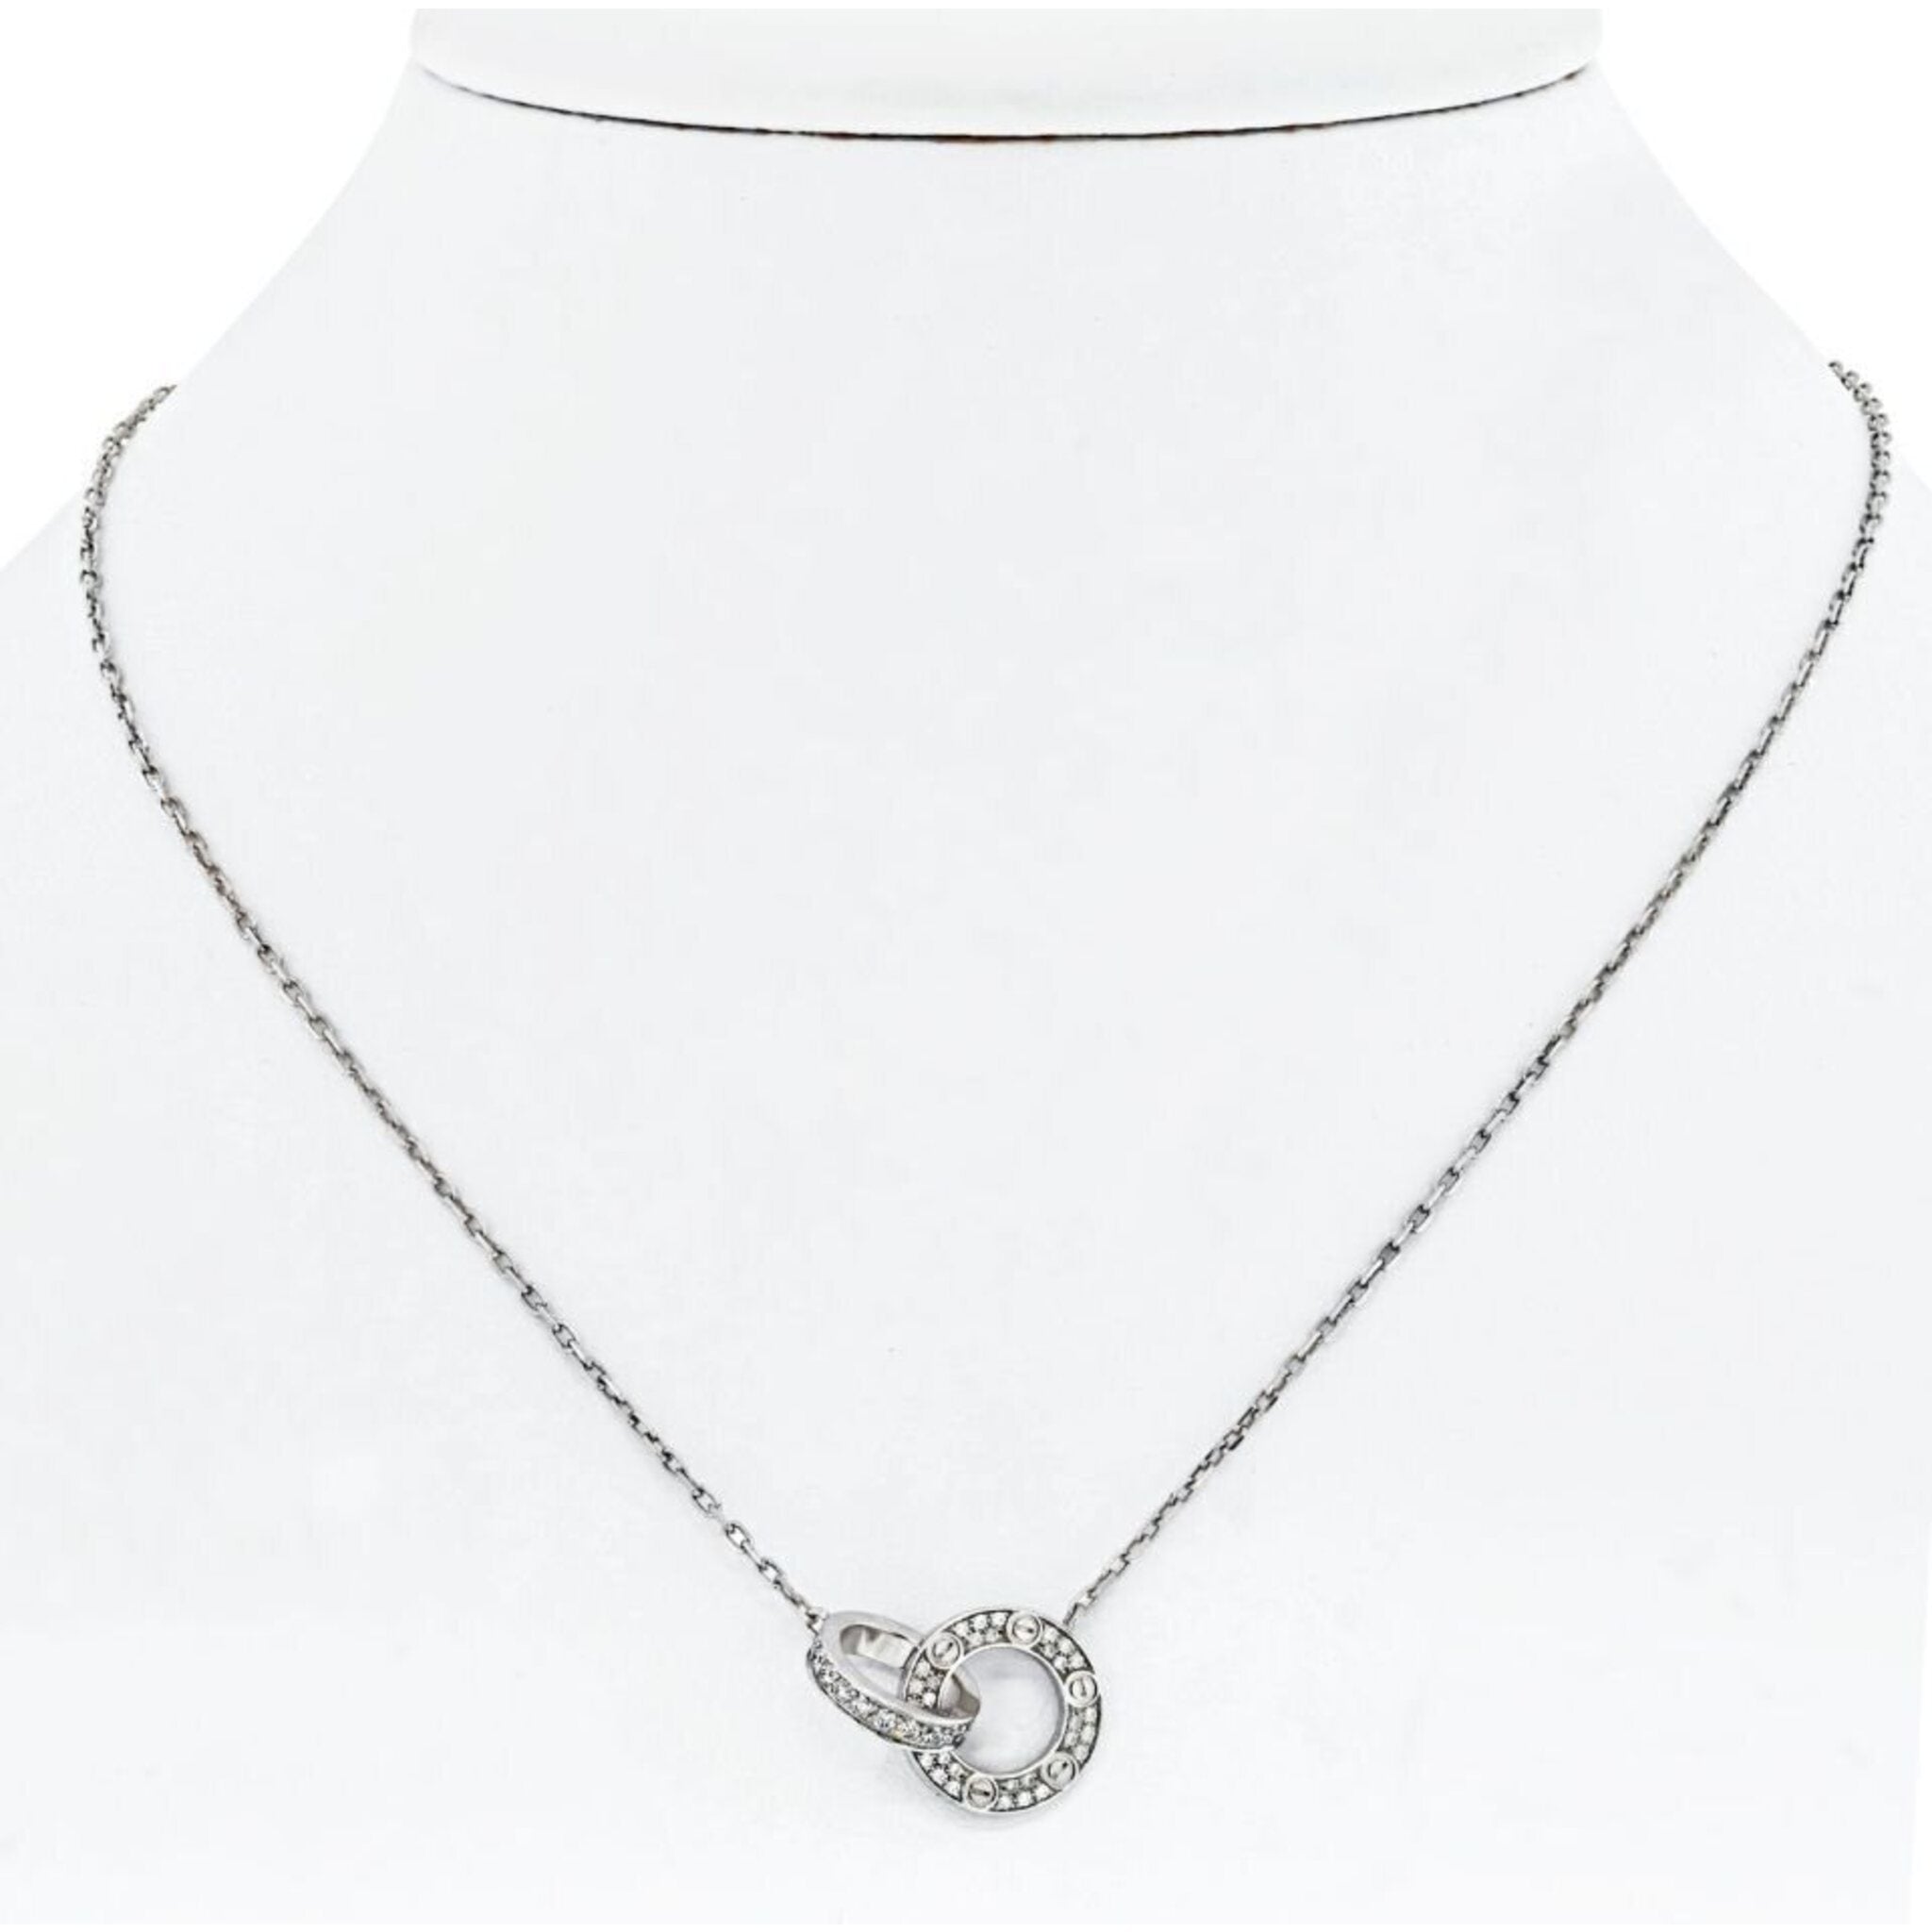 Redline Jewerly - Pure - Chain Necklace For Women with 0.10ct Round Diamond  in White Gold Bezel Setting - Redline